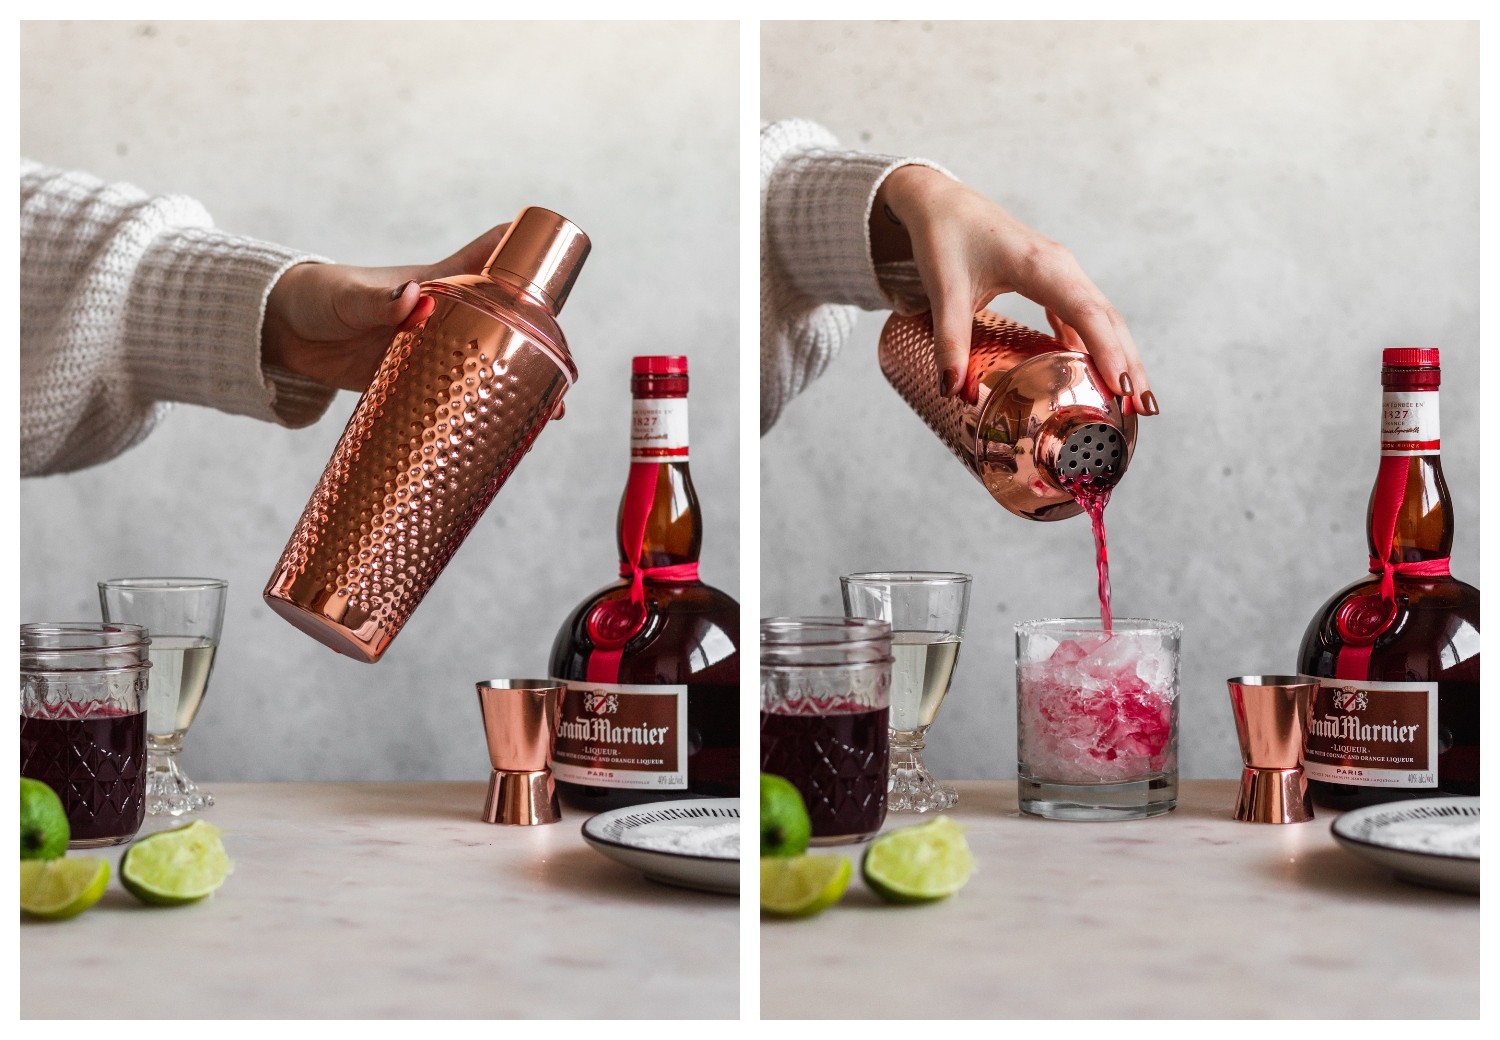 Two images; on the right, a woman's hand is shaking a copper cocktail shaker with a grey background. On the right, the hand is pouring a red cocktail into a rocks glass.